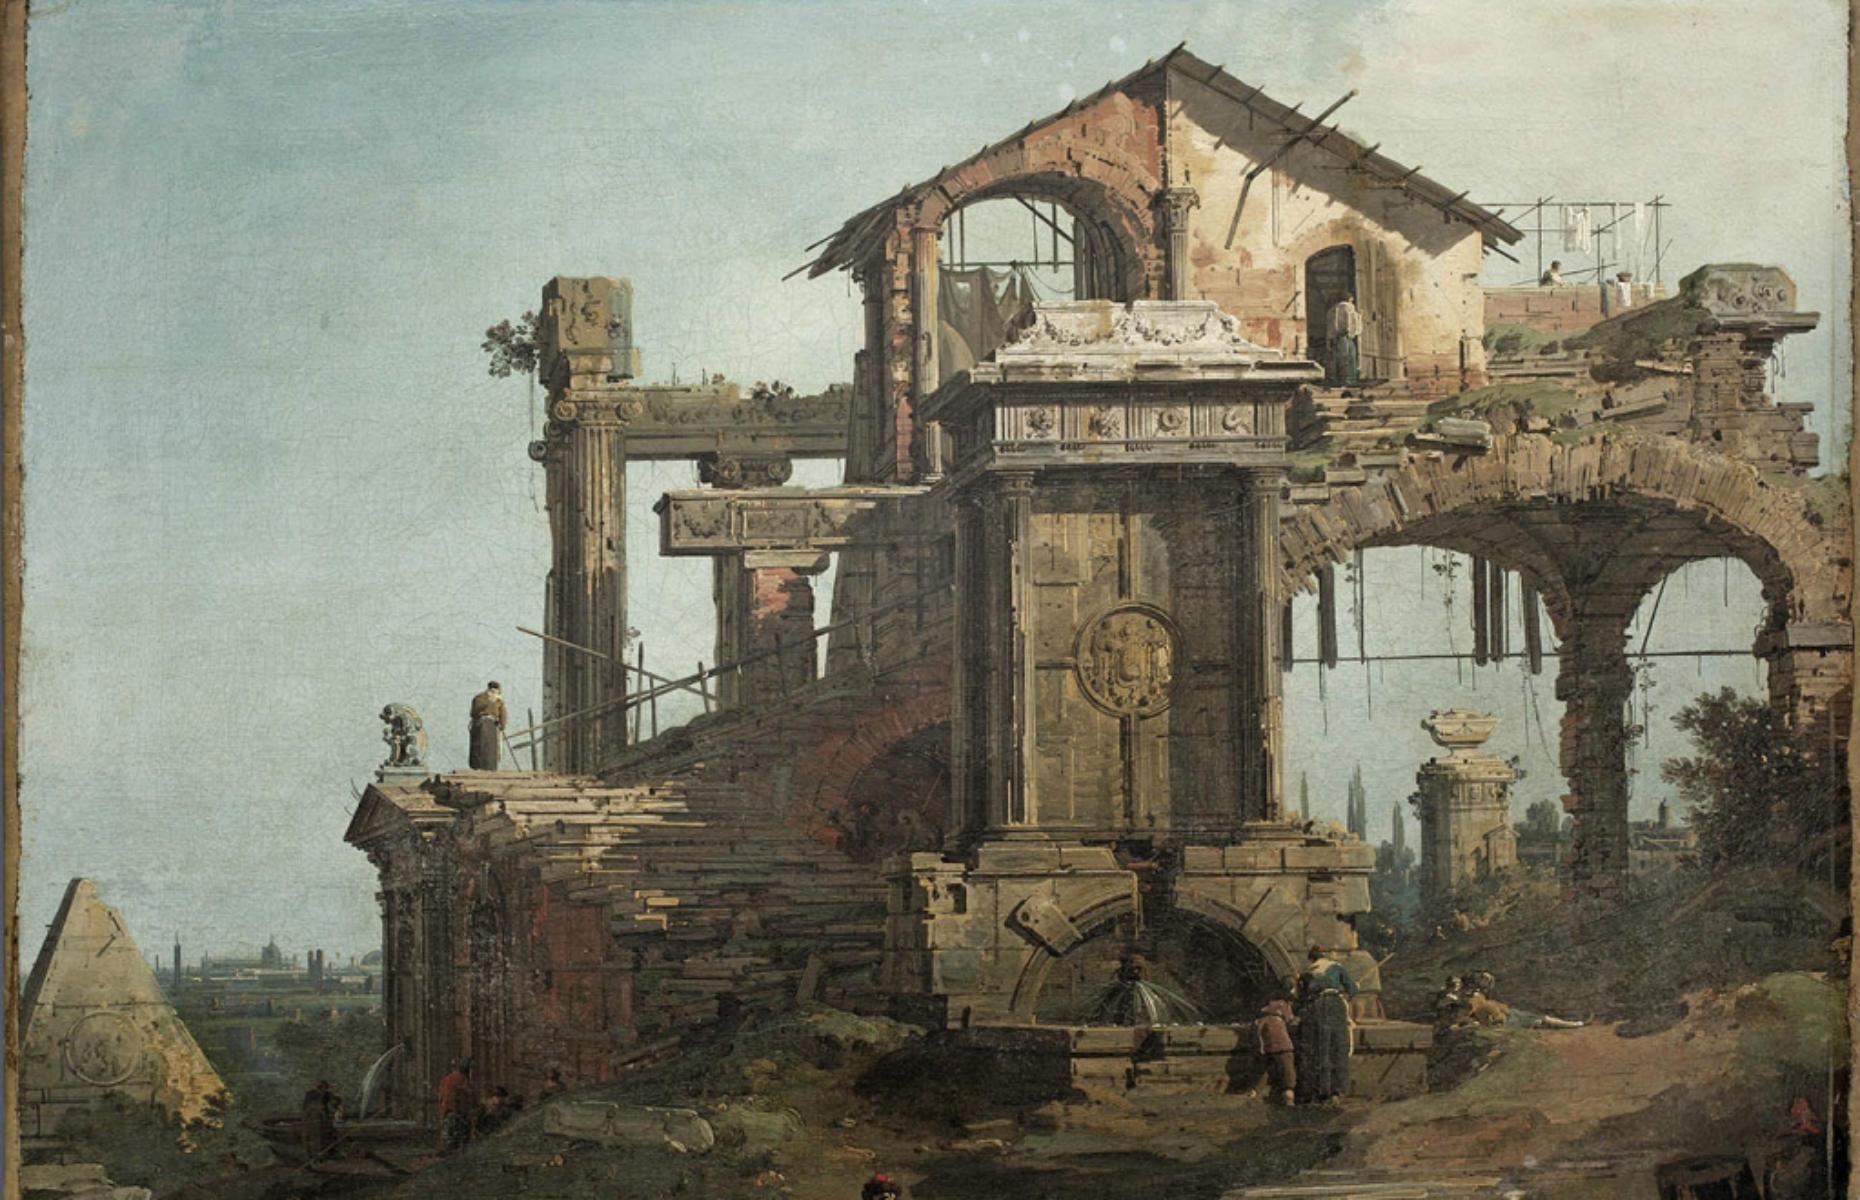 The gift that turned out to be a Canaletto: $2.4 million (£2m)